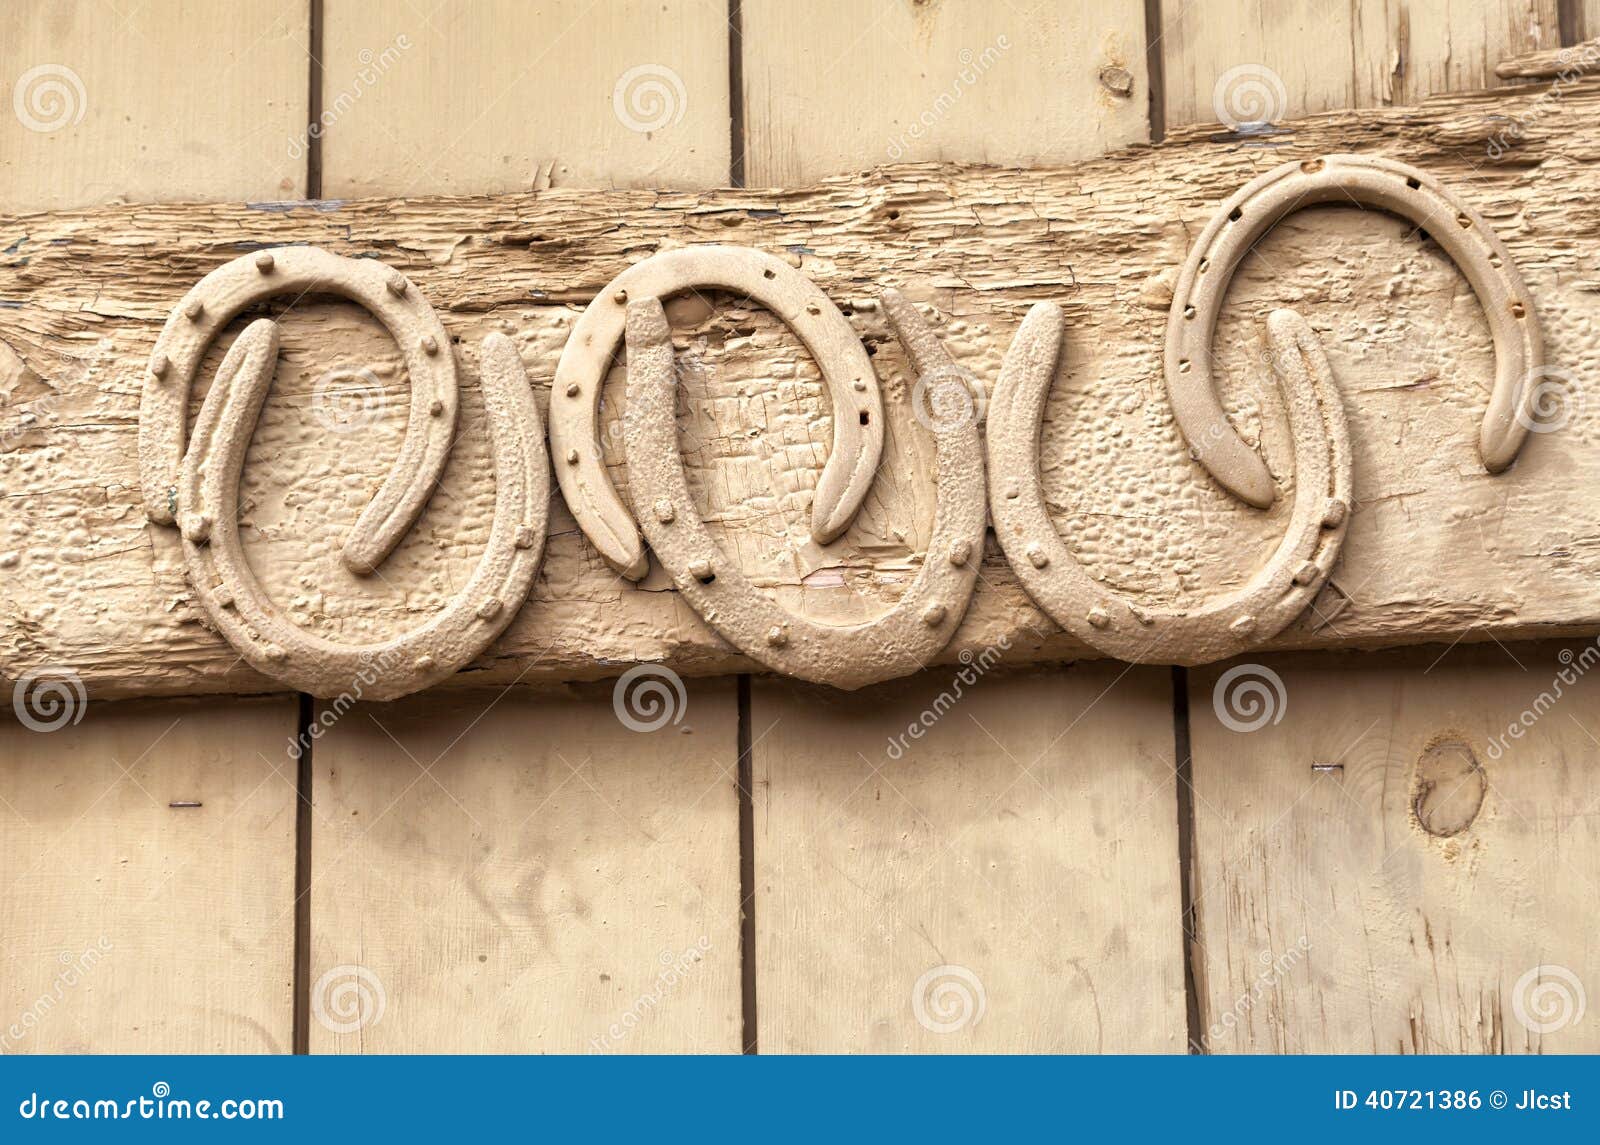 horse shoes nailed to old wooden door